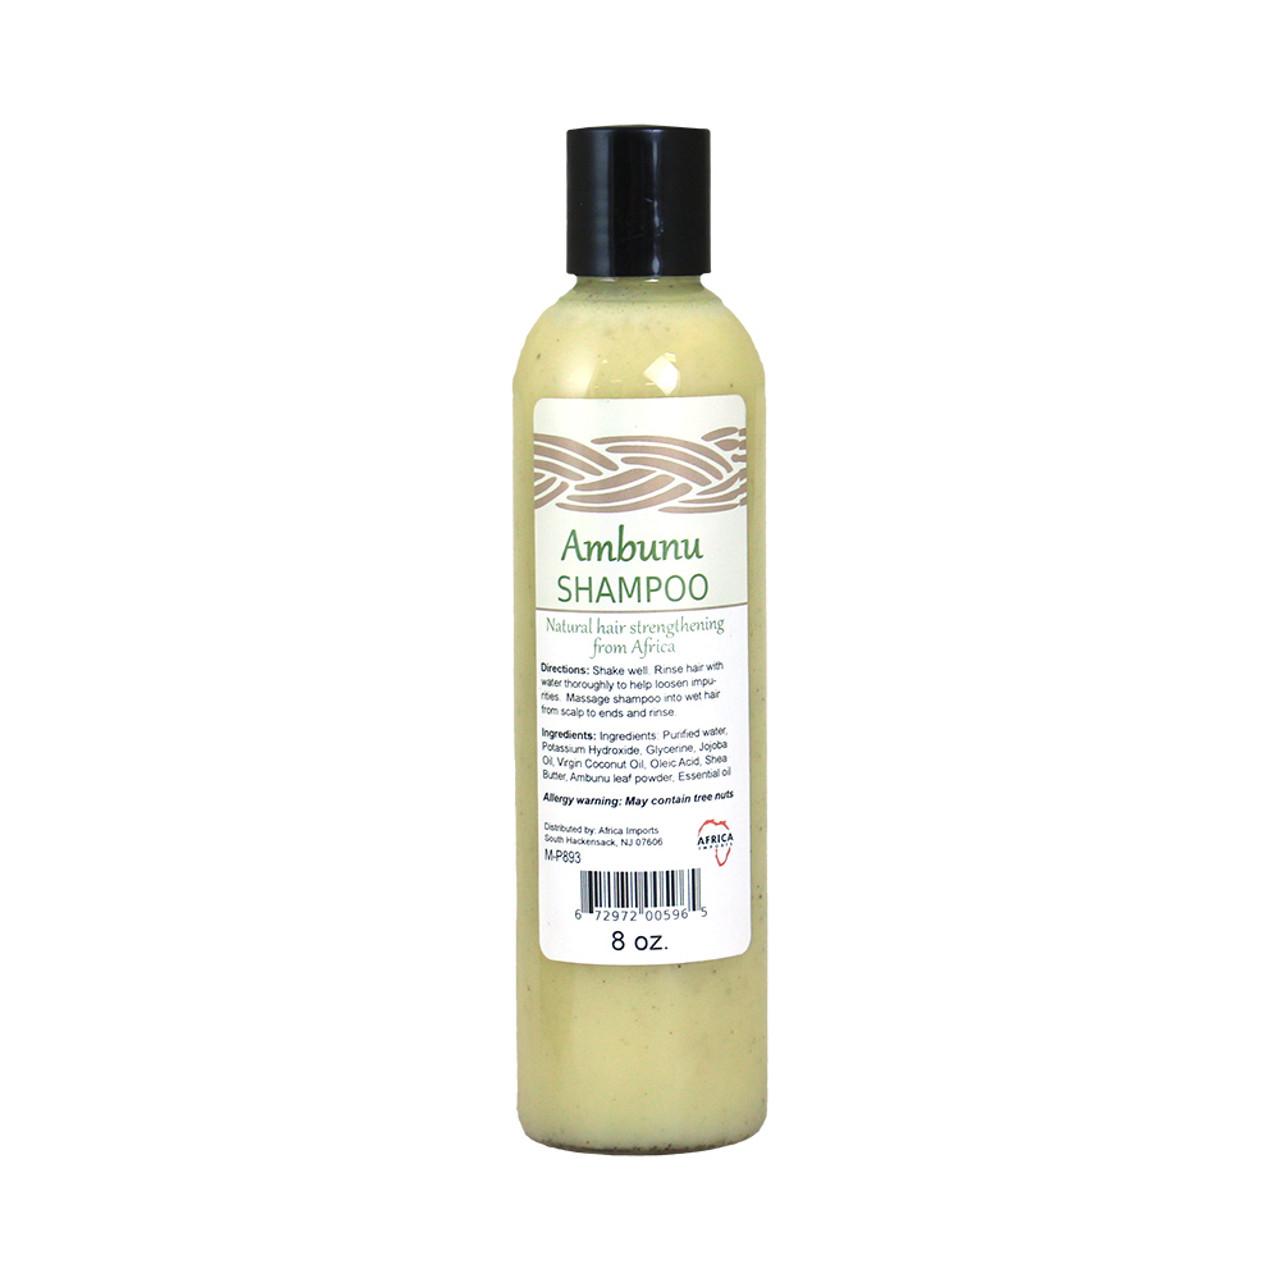 Africa Imports - Ambunu is a natural cleanser. It also works to make hair  stronger, shinier, smoother and thicker. Only recently available outside of  Africa, ambunu is a natural detangler. It moisturizes